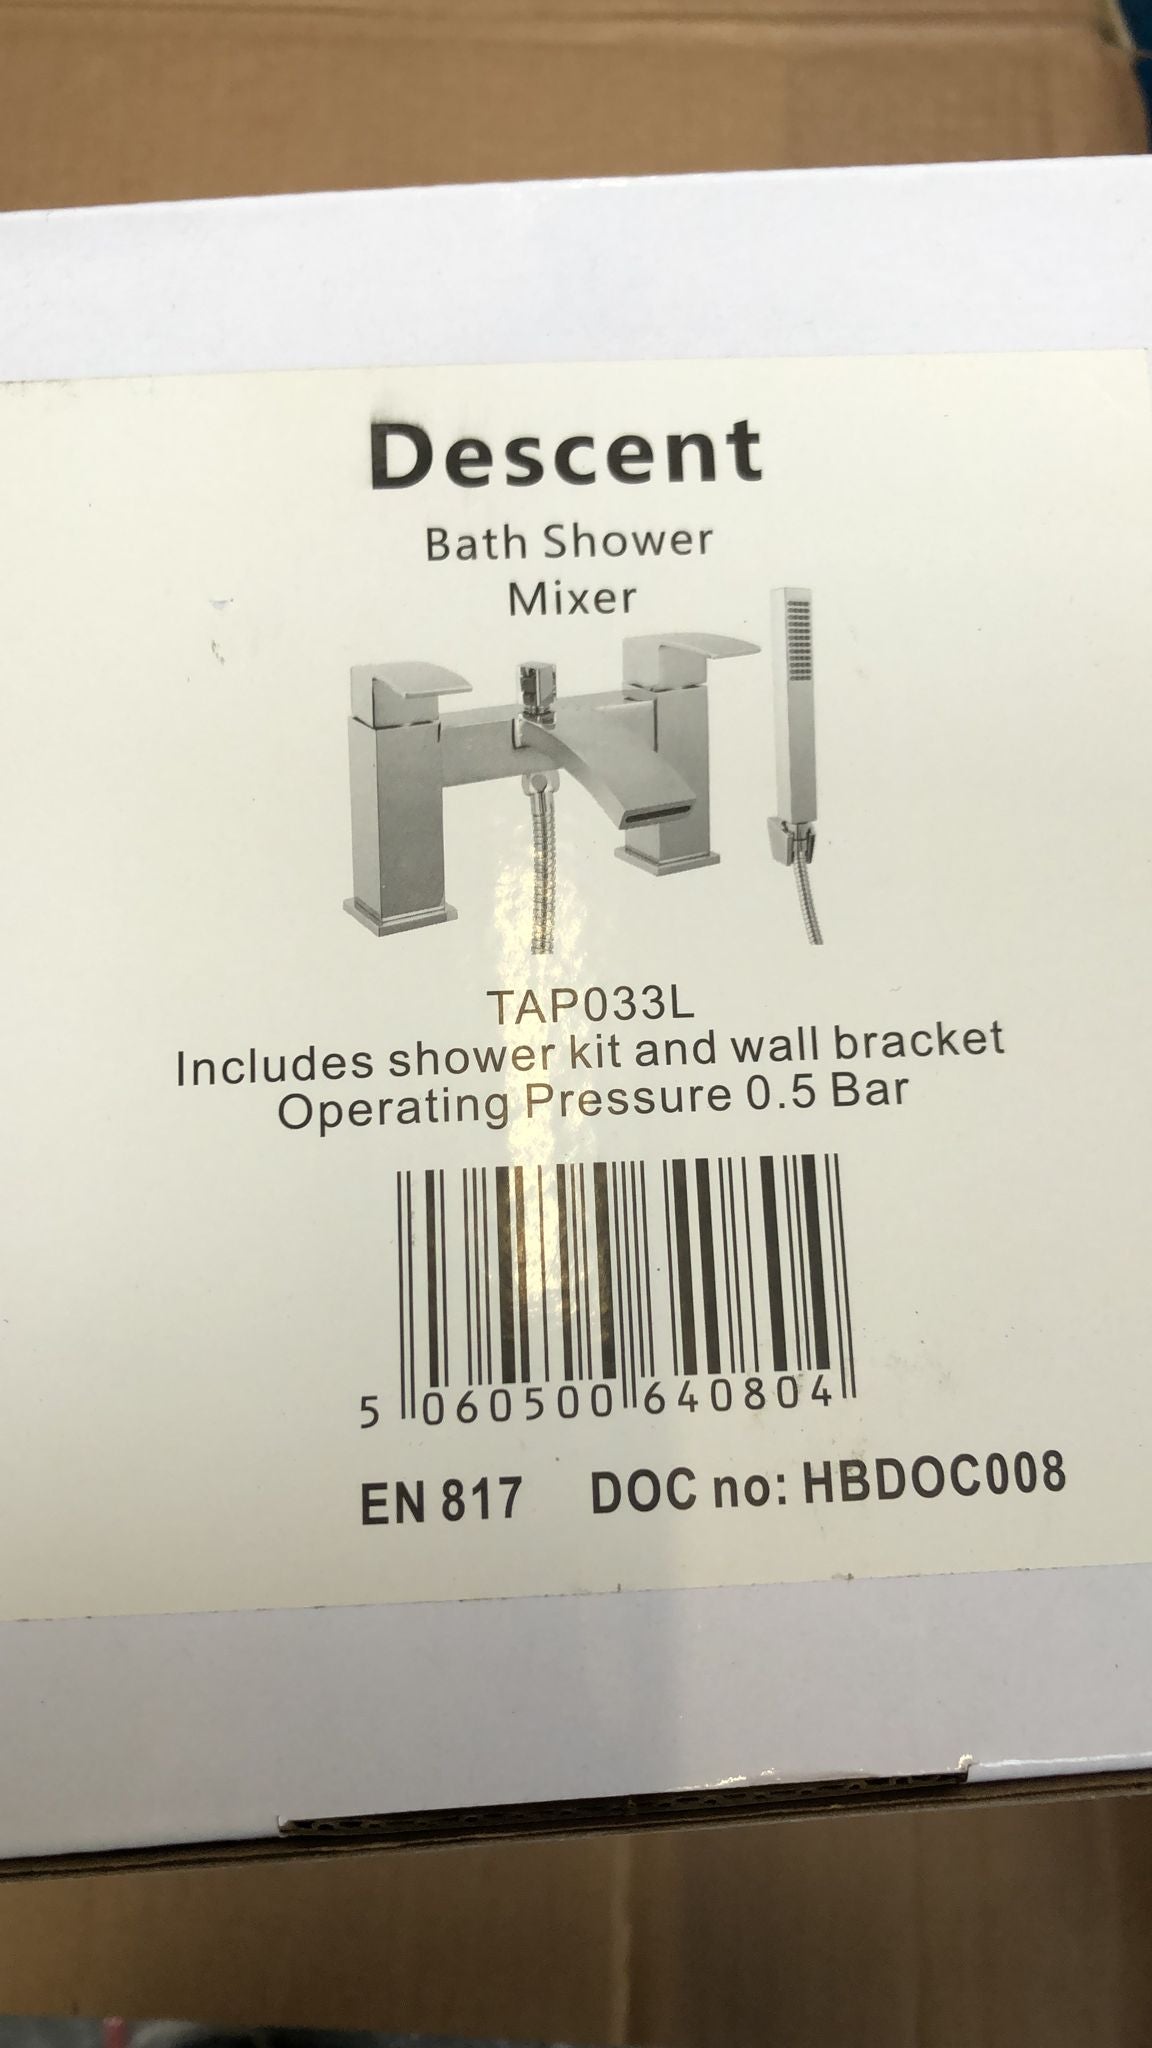 Descent Bath Shower Mixer with shower kit and wall bracket-0804